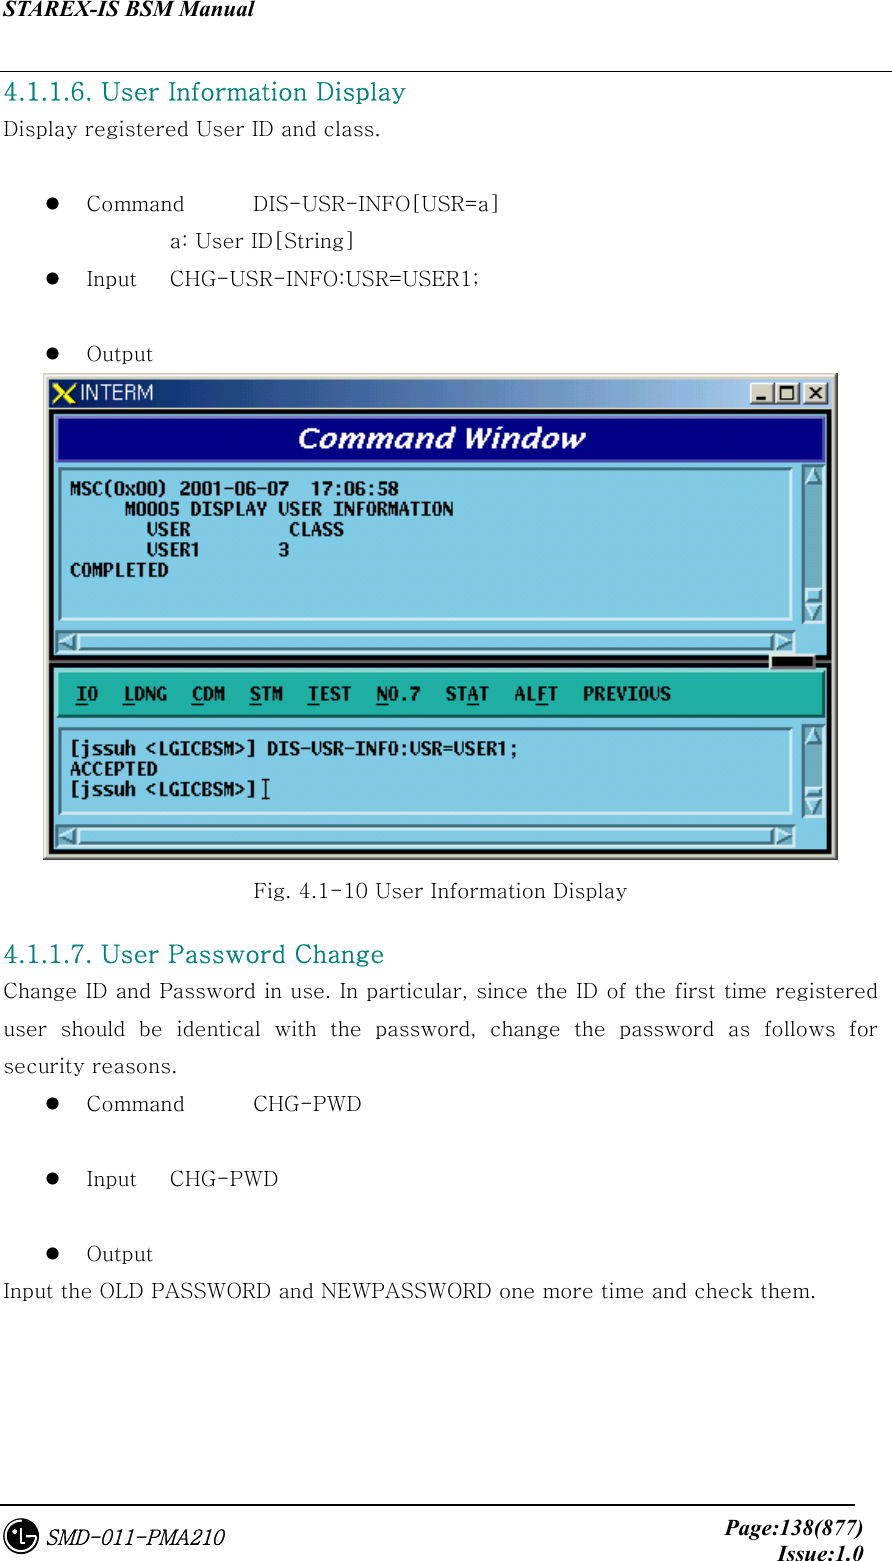 STAREX-IS BSM Manual     Page:138(877)Issue:1.0SMD-011-PMA210 4.1.1.6. User Information Display Display registered User ID and class.    Command  DIS-USR-INFO[USR=a]   a: User ID[String]   Input  CHG-USR-INFO:USR=USER1;    Output    Fig. 4.1-10 User Information Display 4.1.1.7. User Password Change Change ID and Password in use. In particular, since the ID of the first time registered user  should  be  identical  with  the  password,  change  the  password  as  follows  for security reasons.   Command  CHG-PWD    Input  CHG-PWD    Output Input the OLD PASSWORD and NEWPASSWORD one more time and check them. 